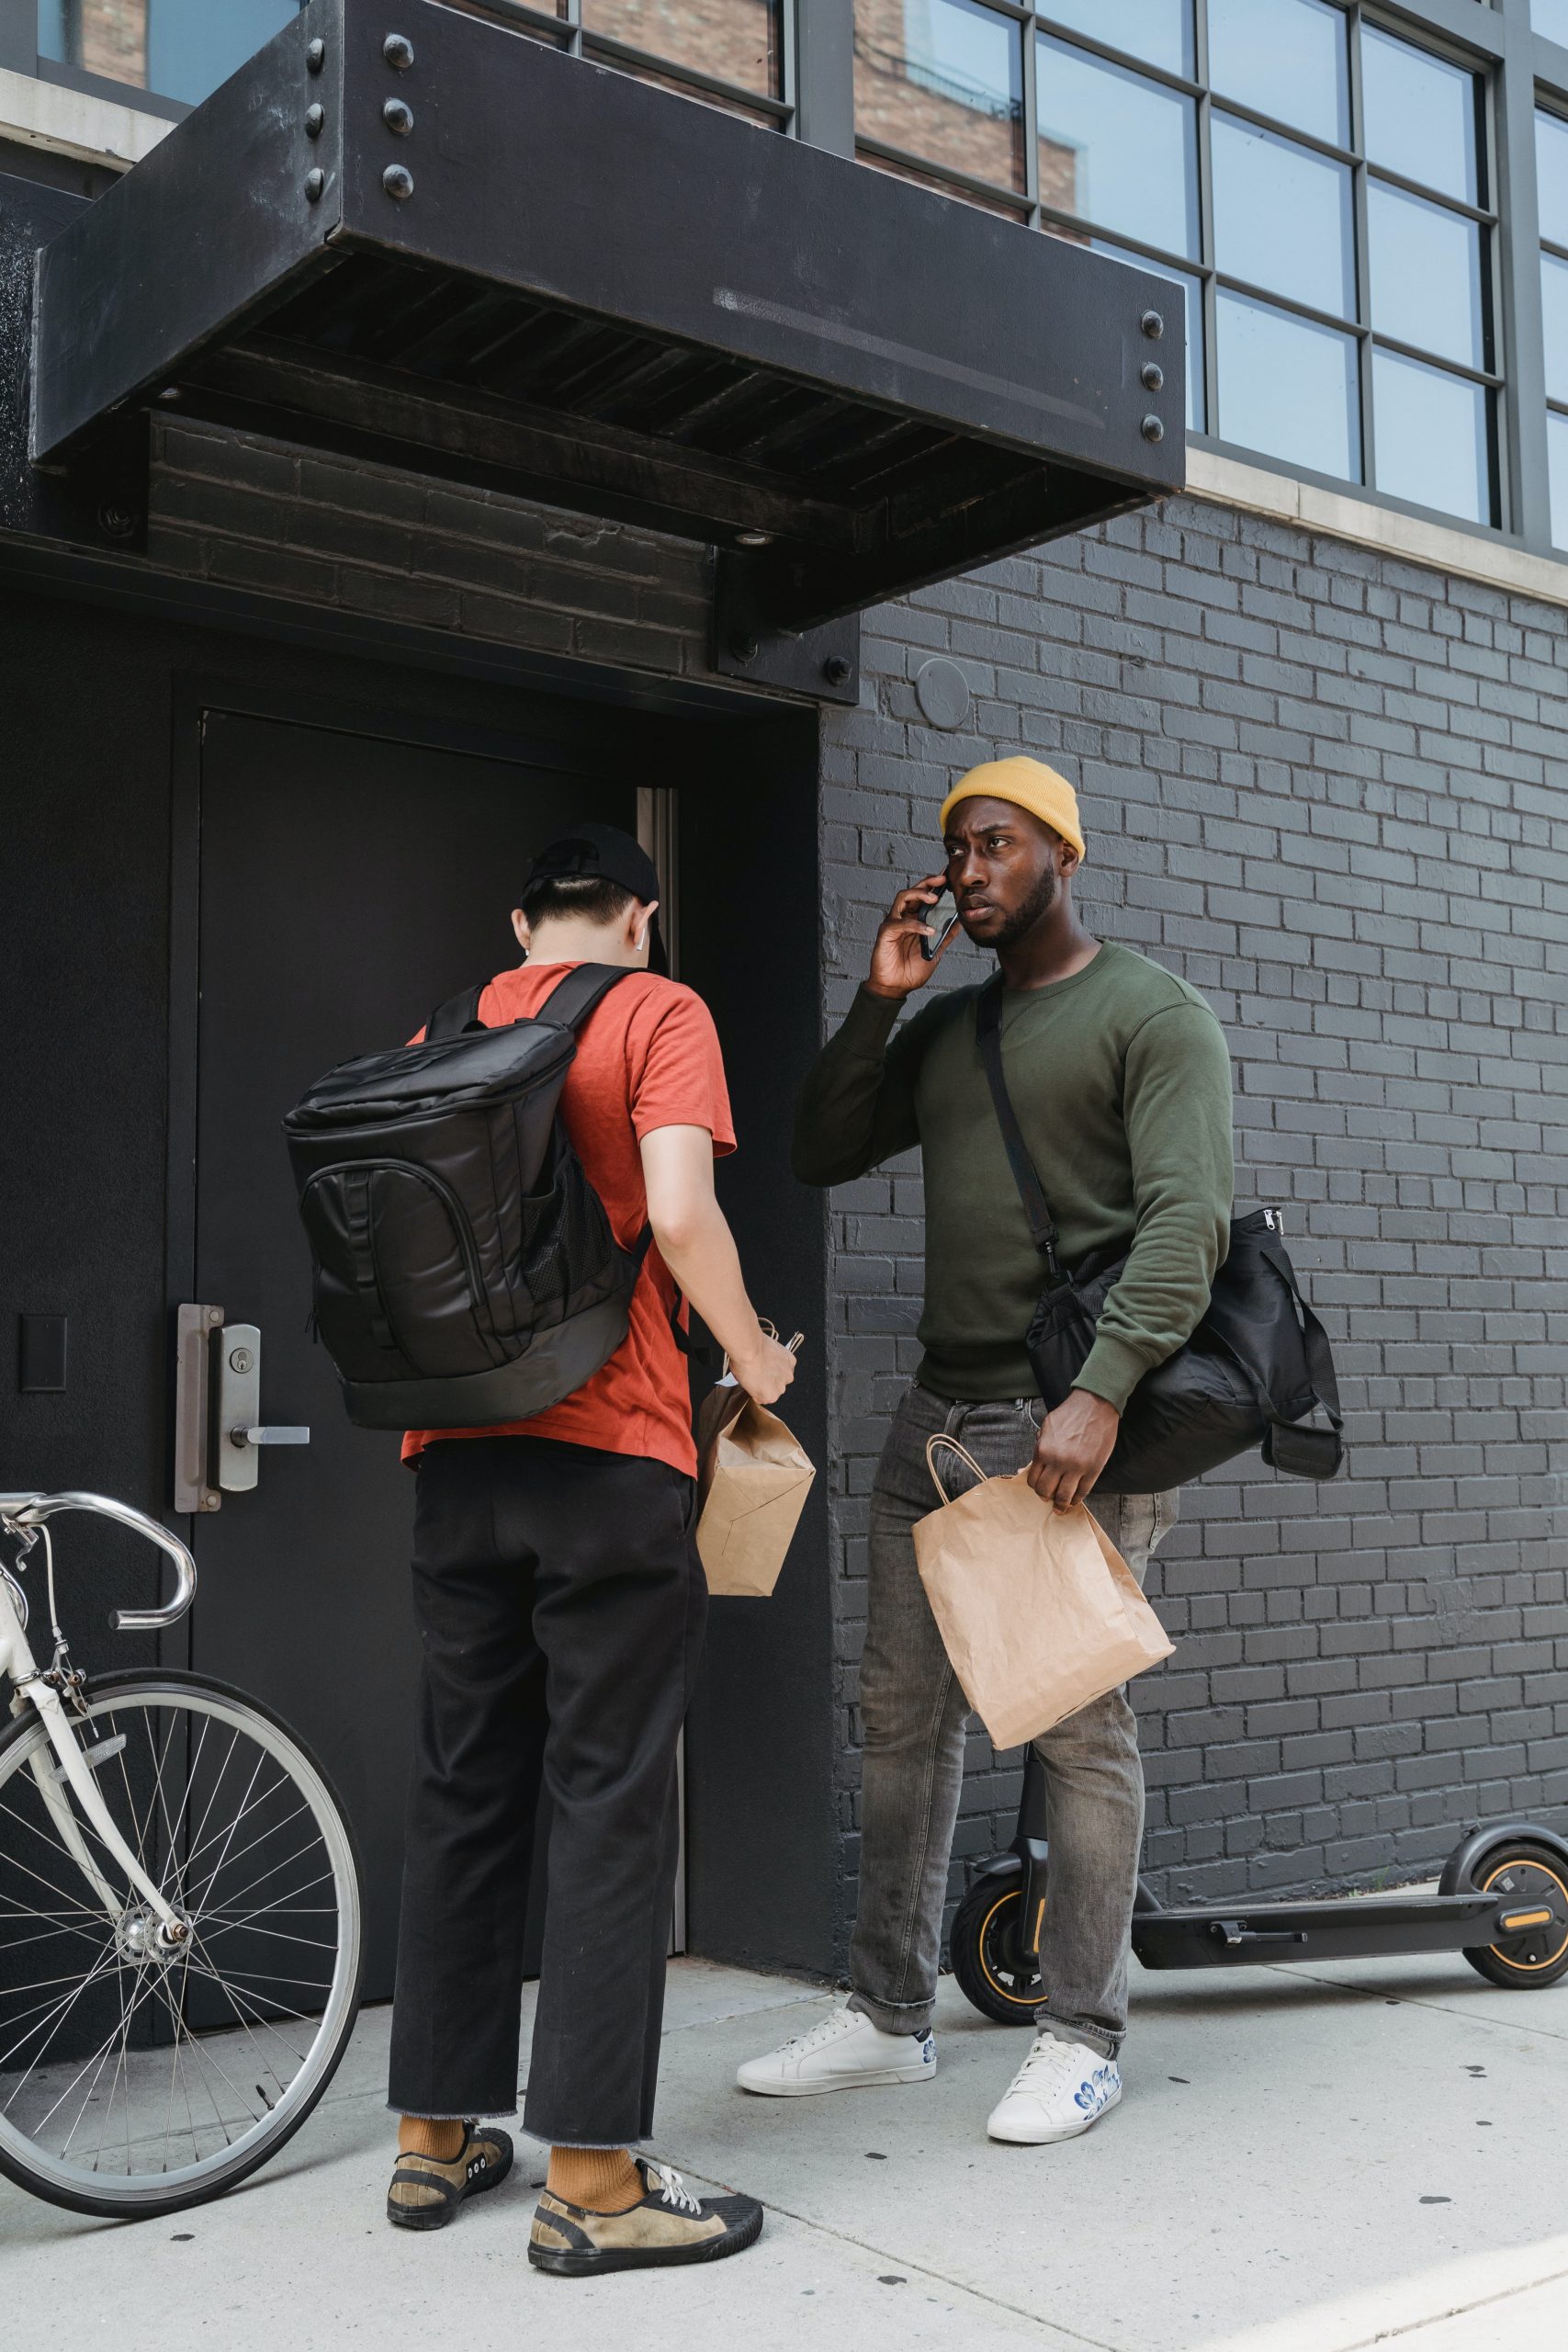 Two food couriers stand outside the entrance to an apartment building. One is on the phone while holding a brown paper delivery bag and the other is carrying a black backpack